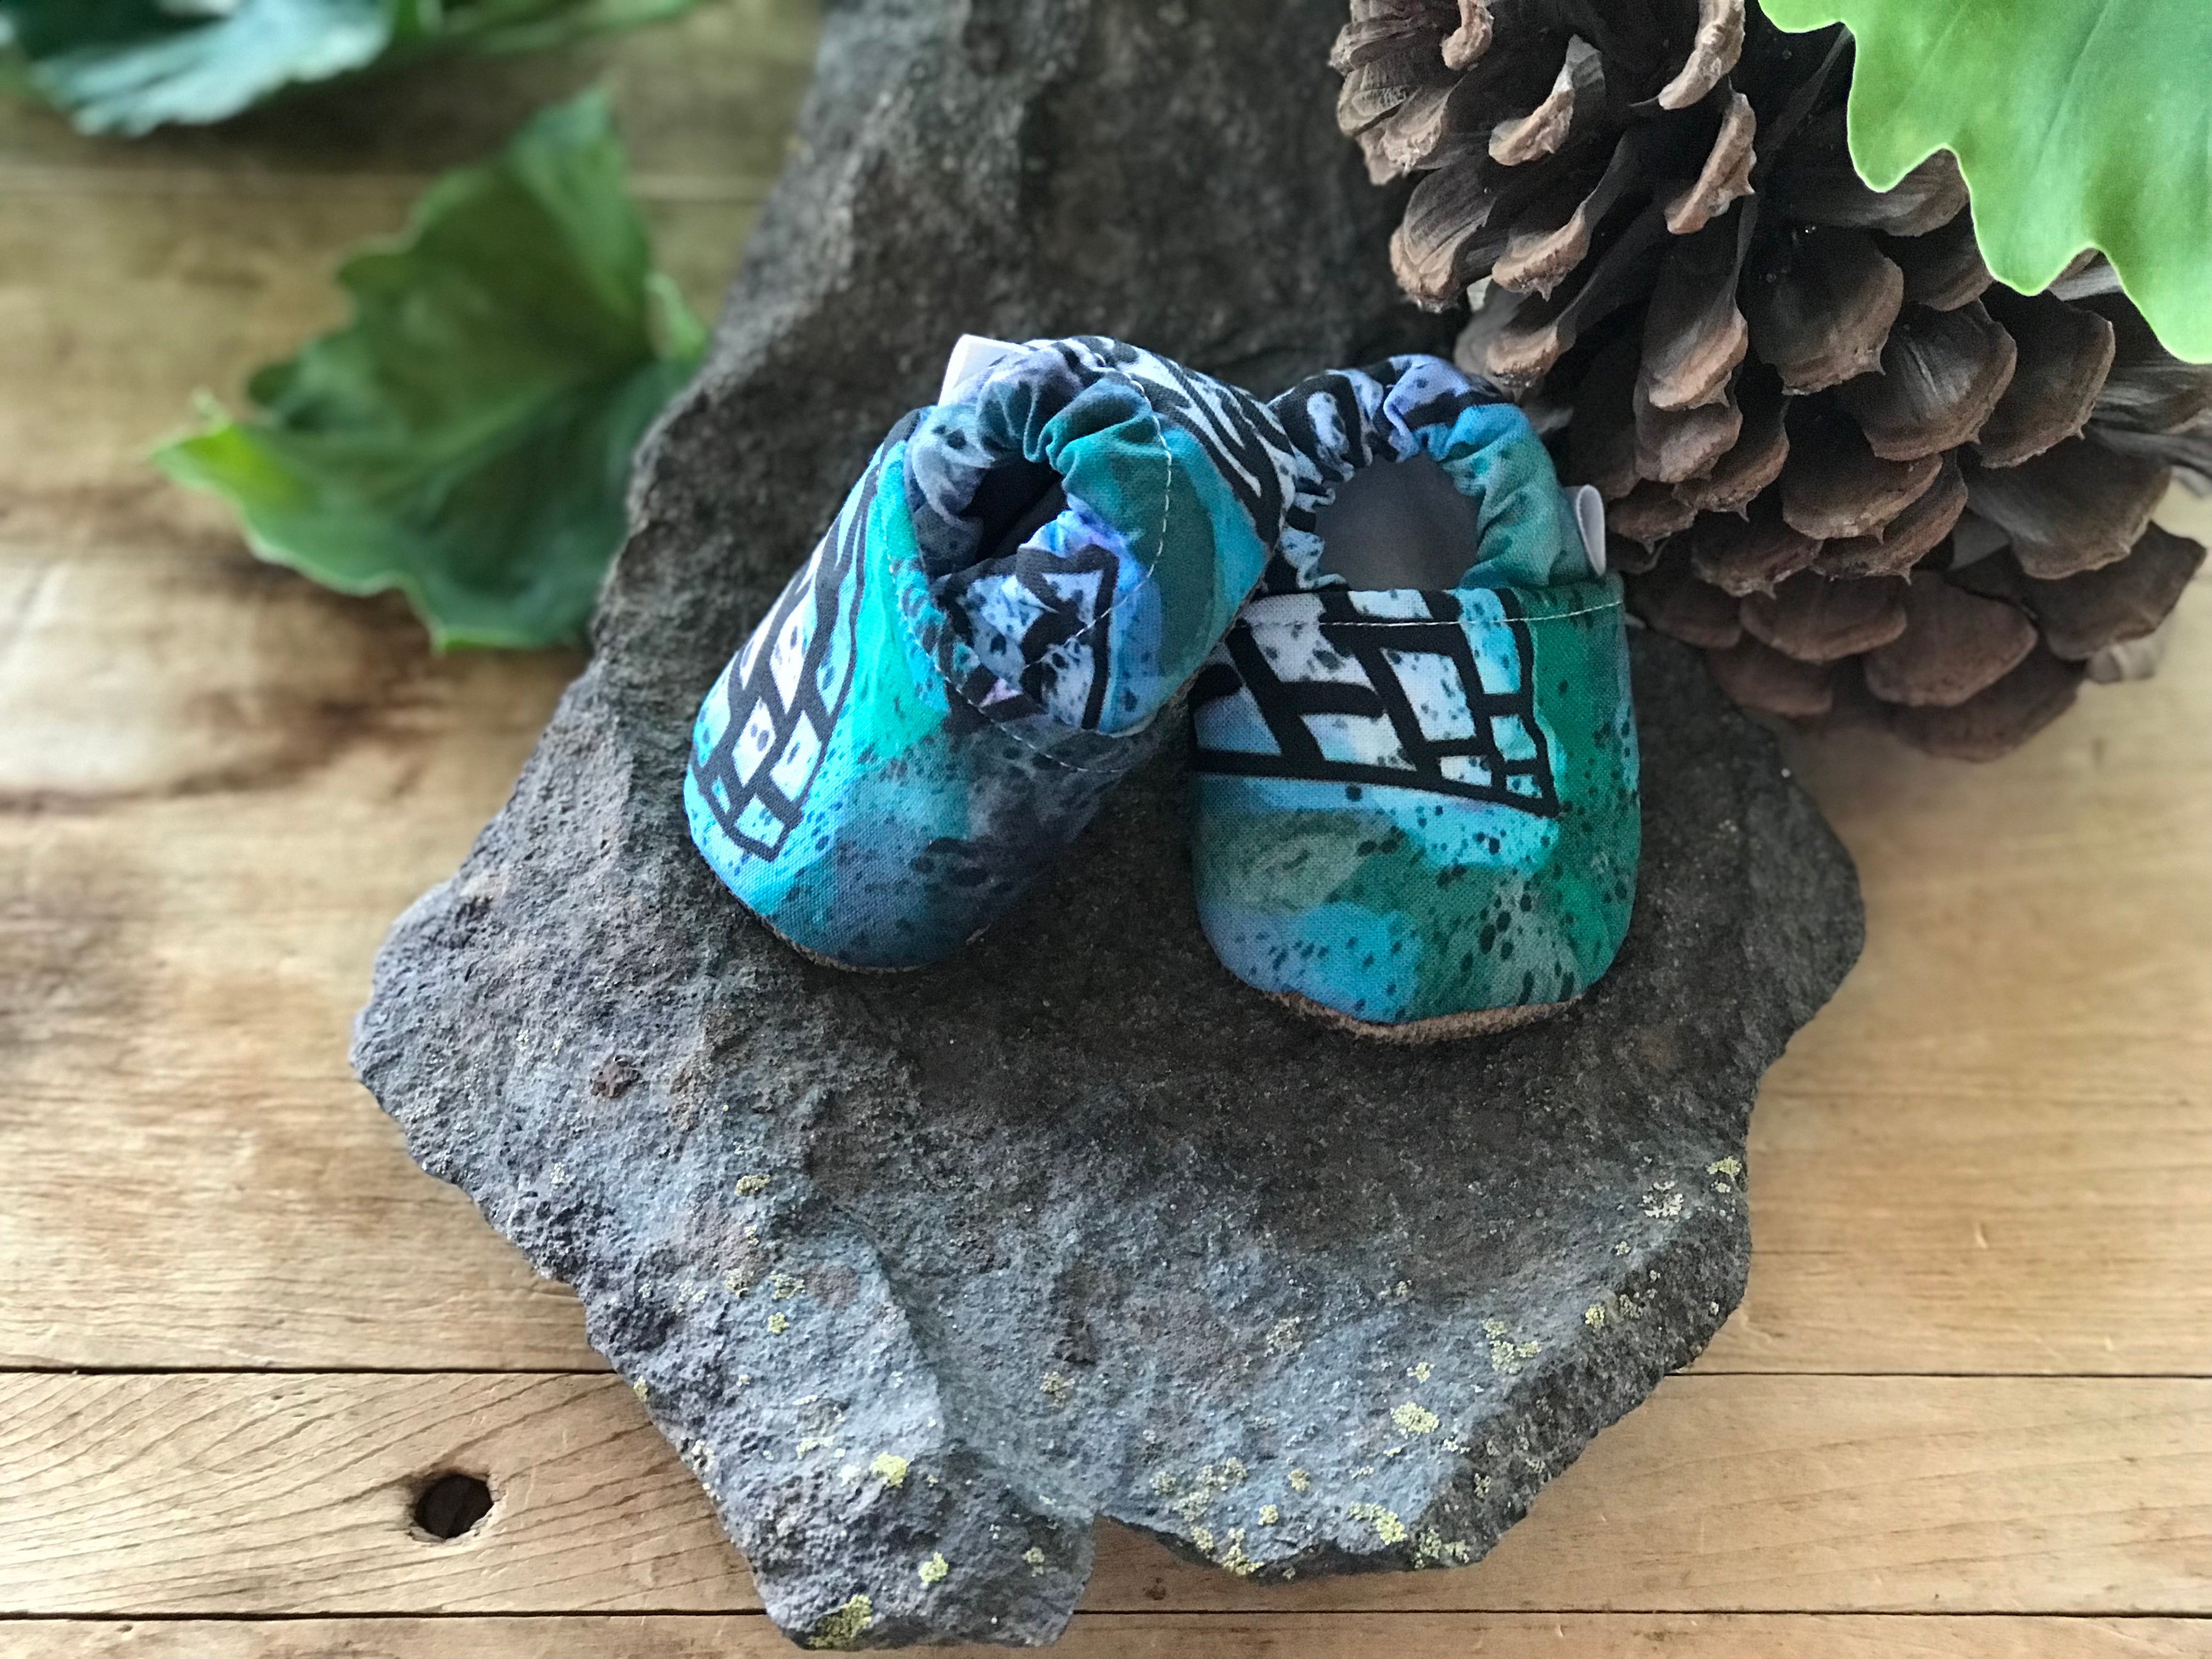 Abstract Art Baby Moccasins